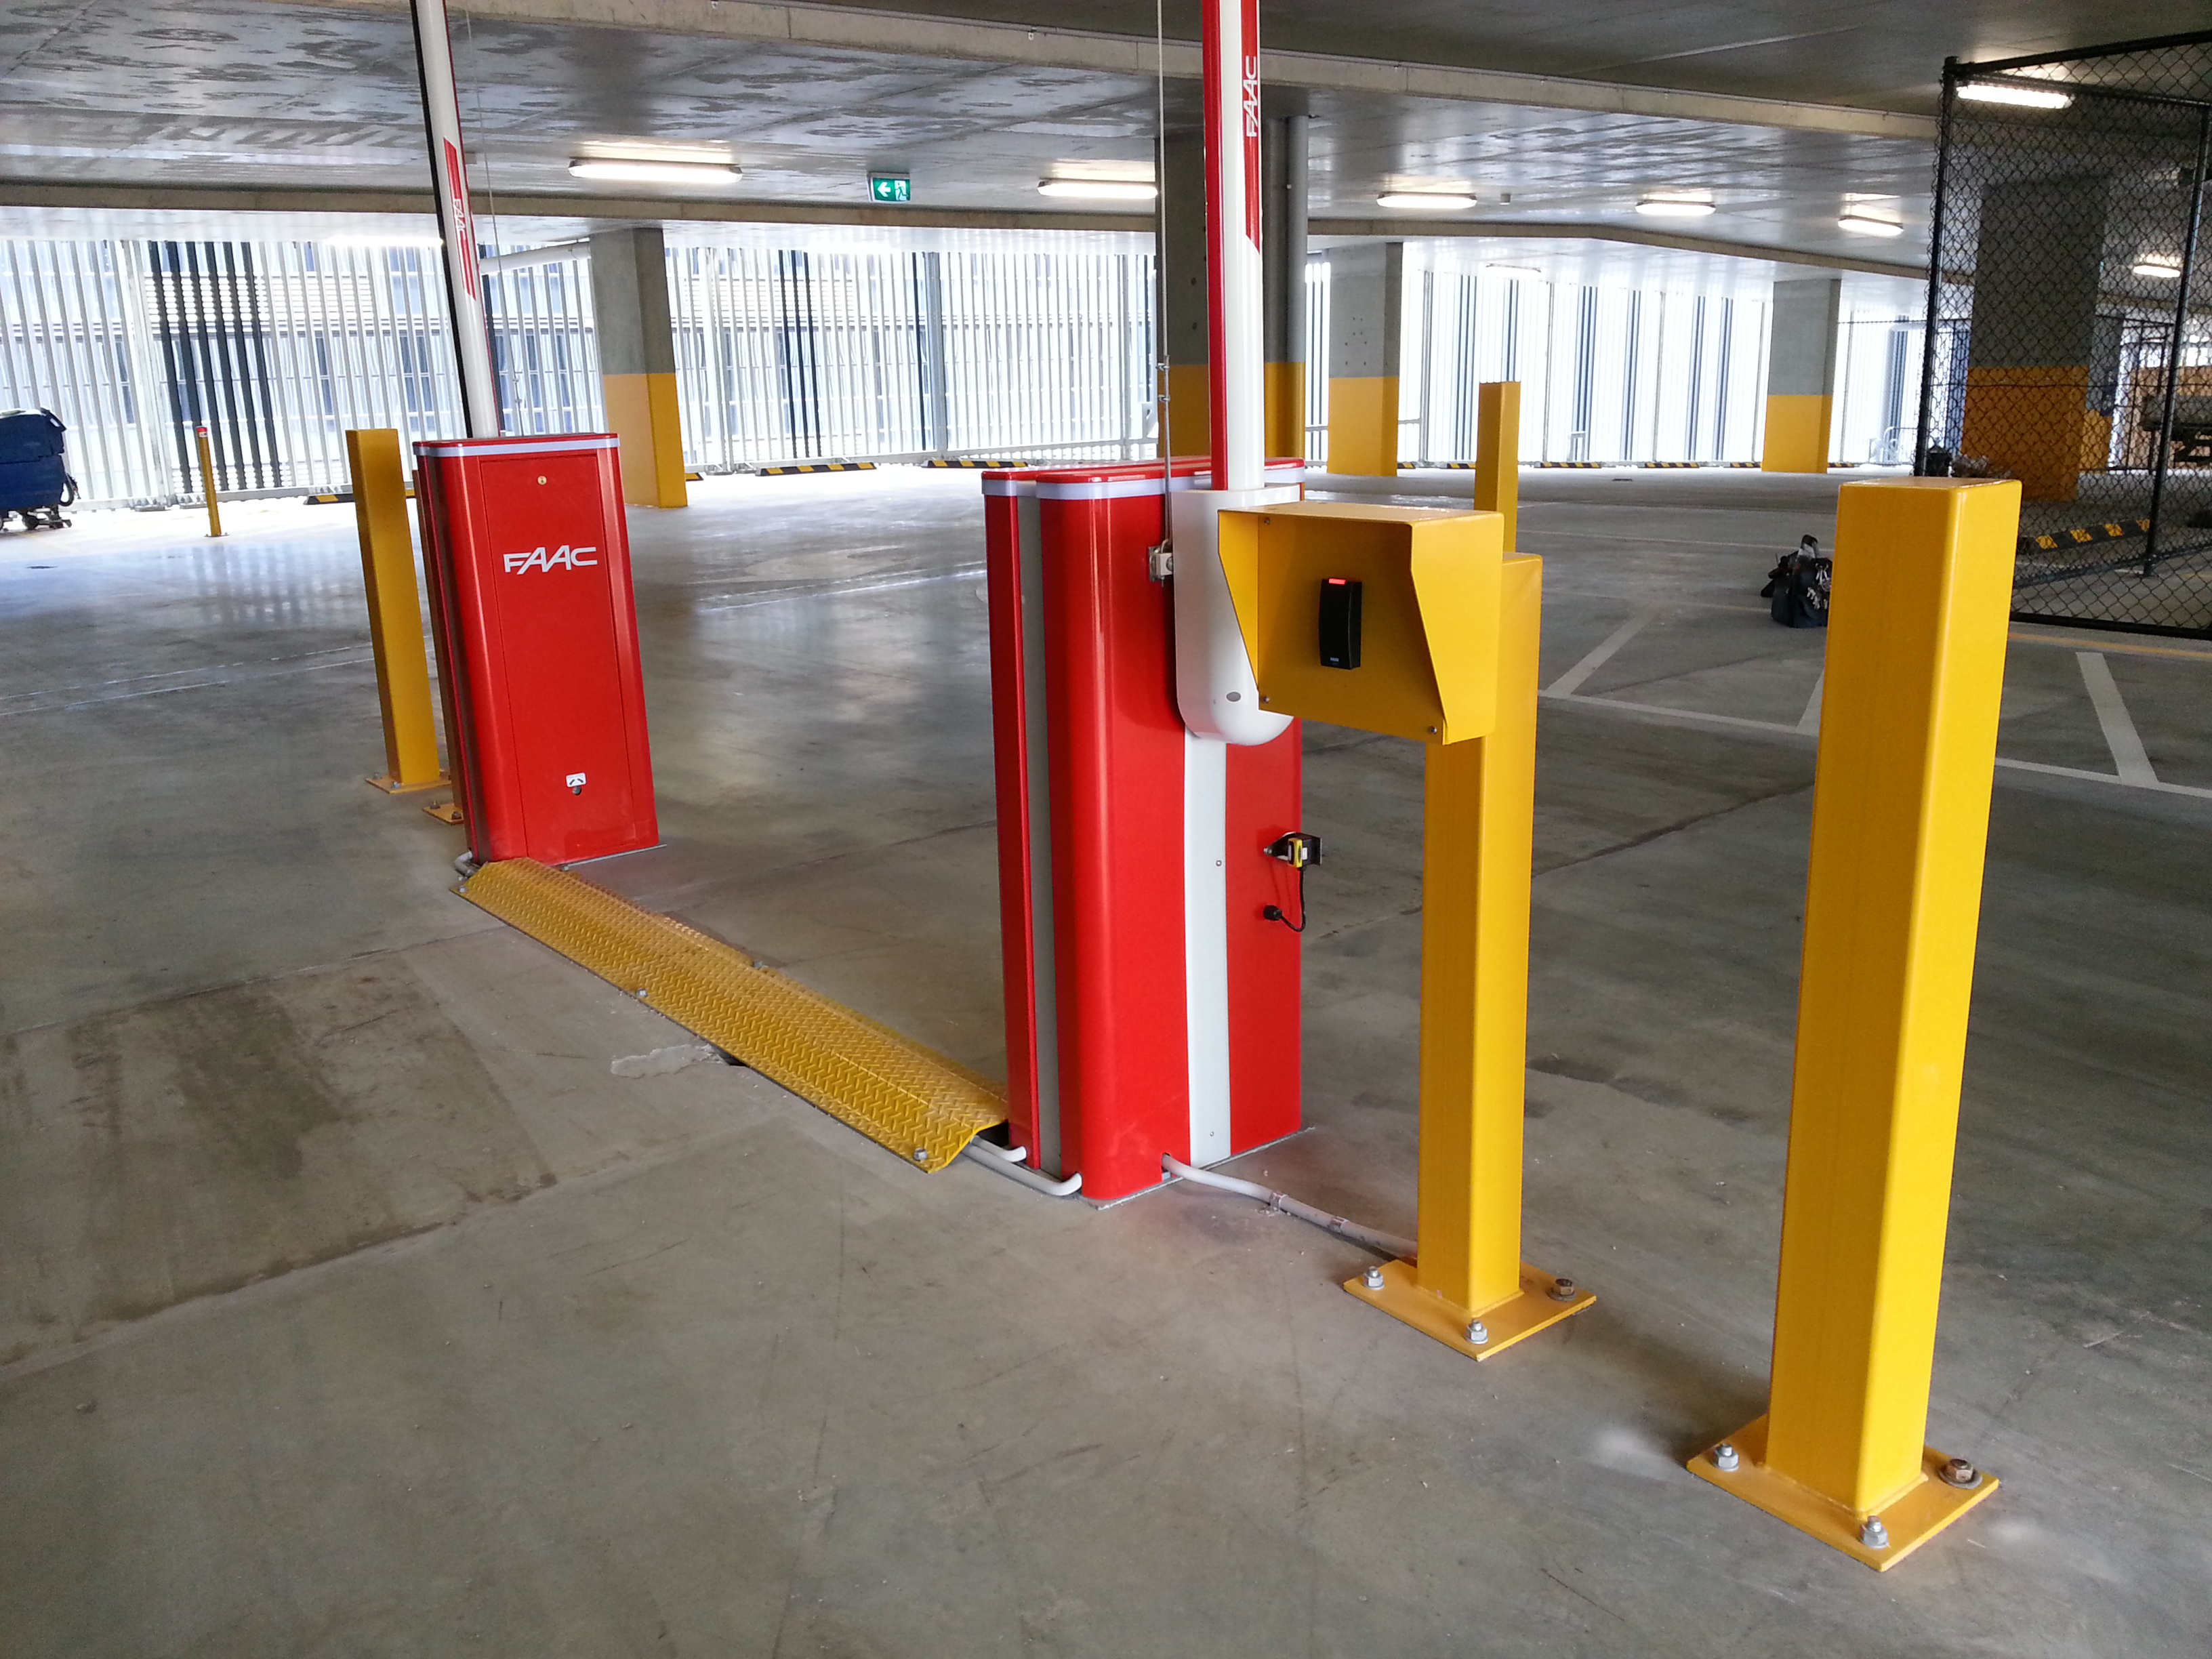 Entry Exit Boom Gates With Access Control System Nexus 3 Business